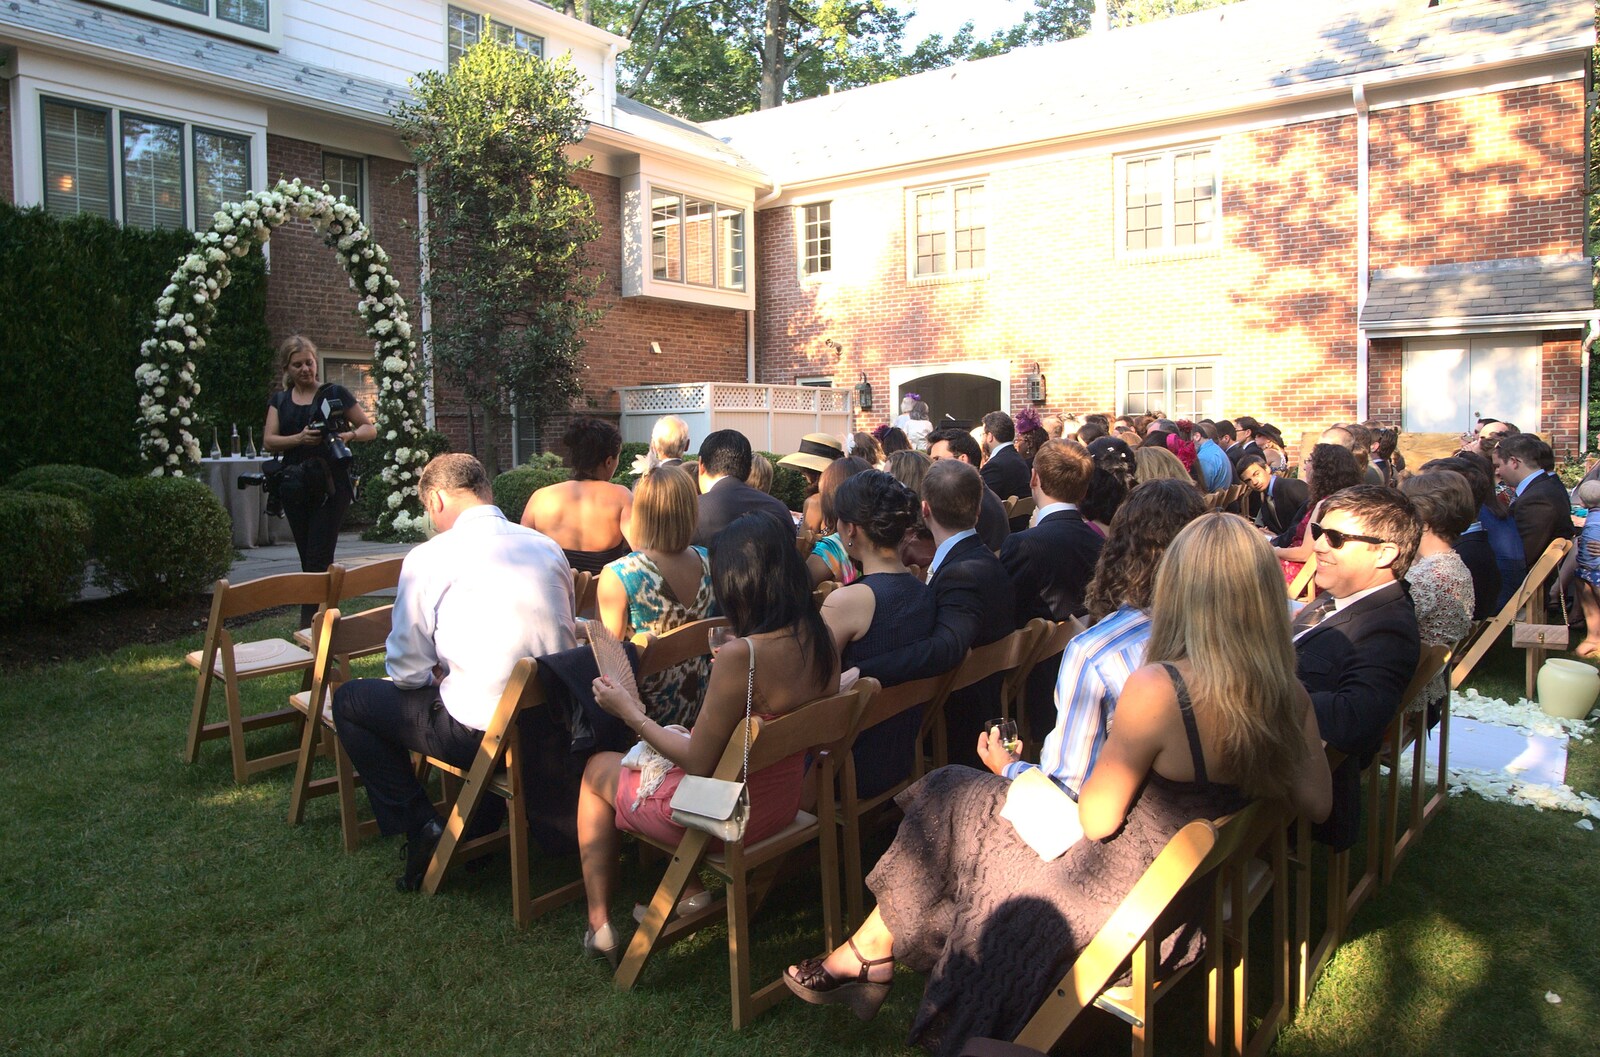 A view from the back from Phil and Tania's Wedding, Short Hills, New Jersey, USA - 20th August 2011